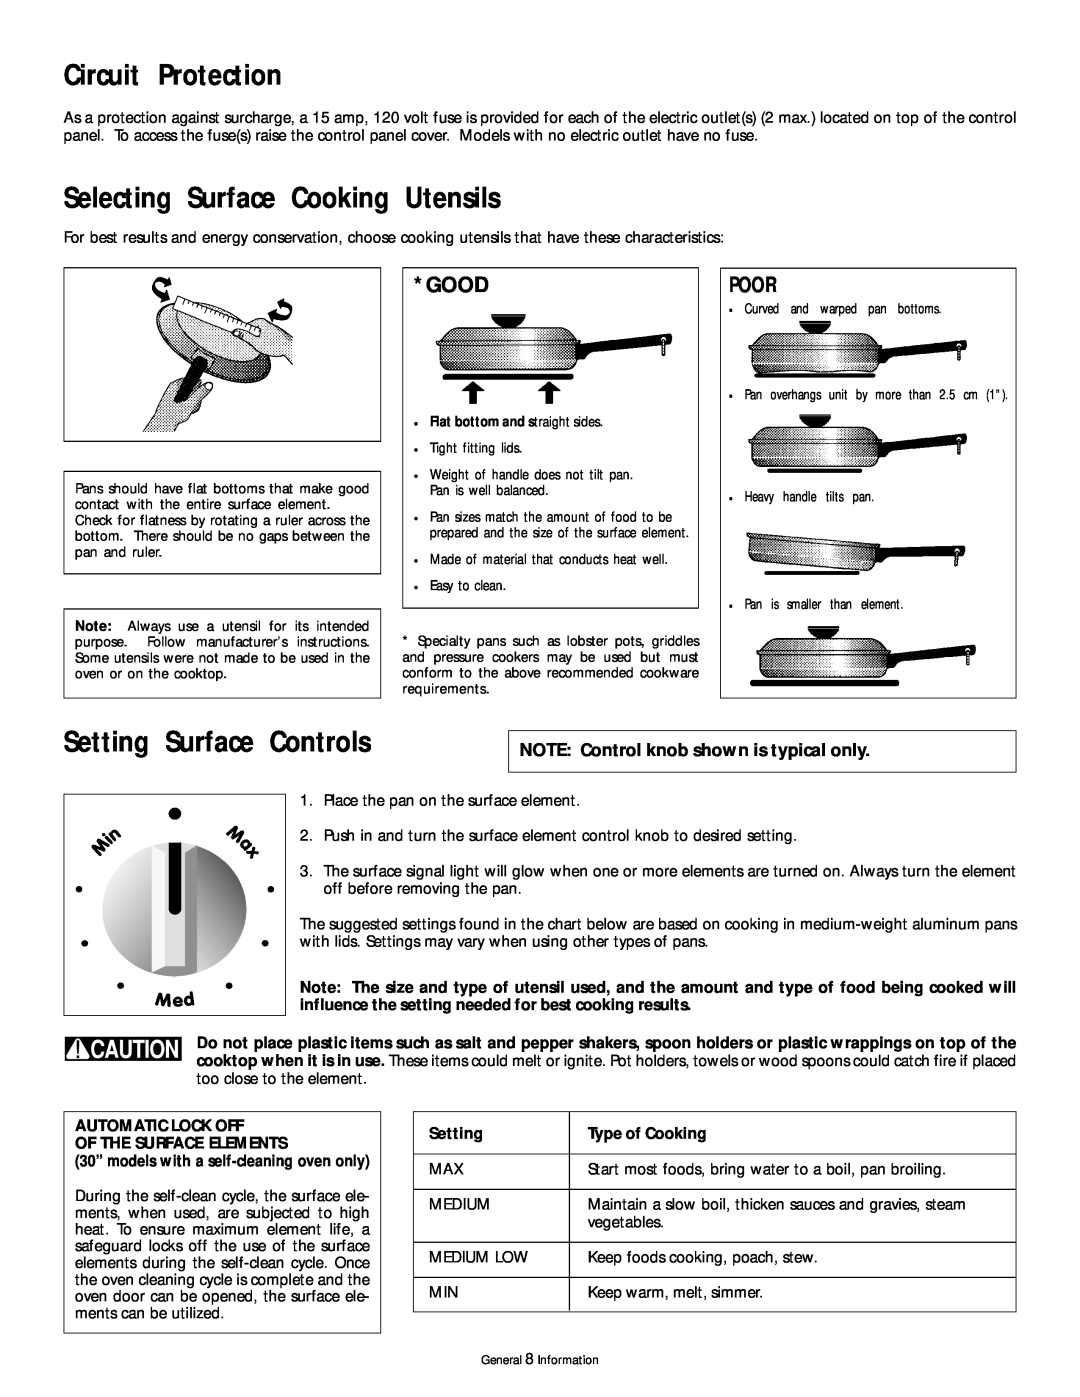 Frigidaire 318200407 manual Circuit Protection, Selecting Surface Cooking Utensils, Setting Surface Controls, Good, Poor 